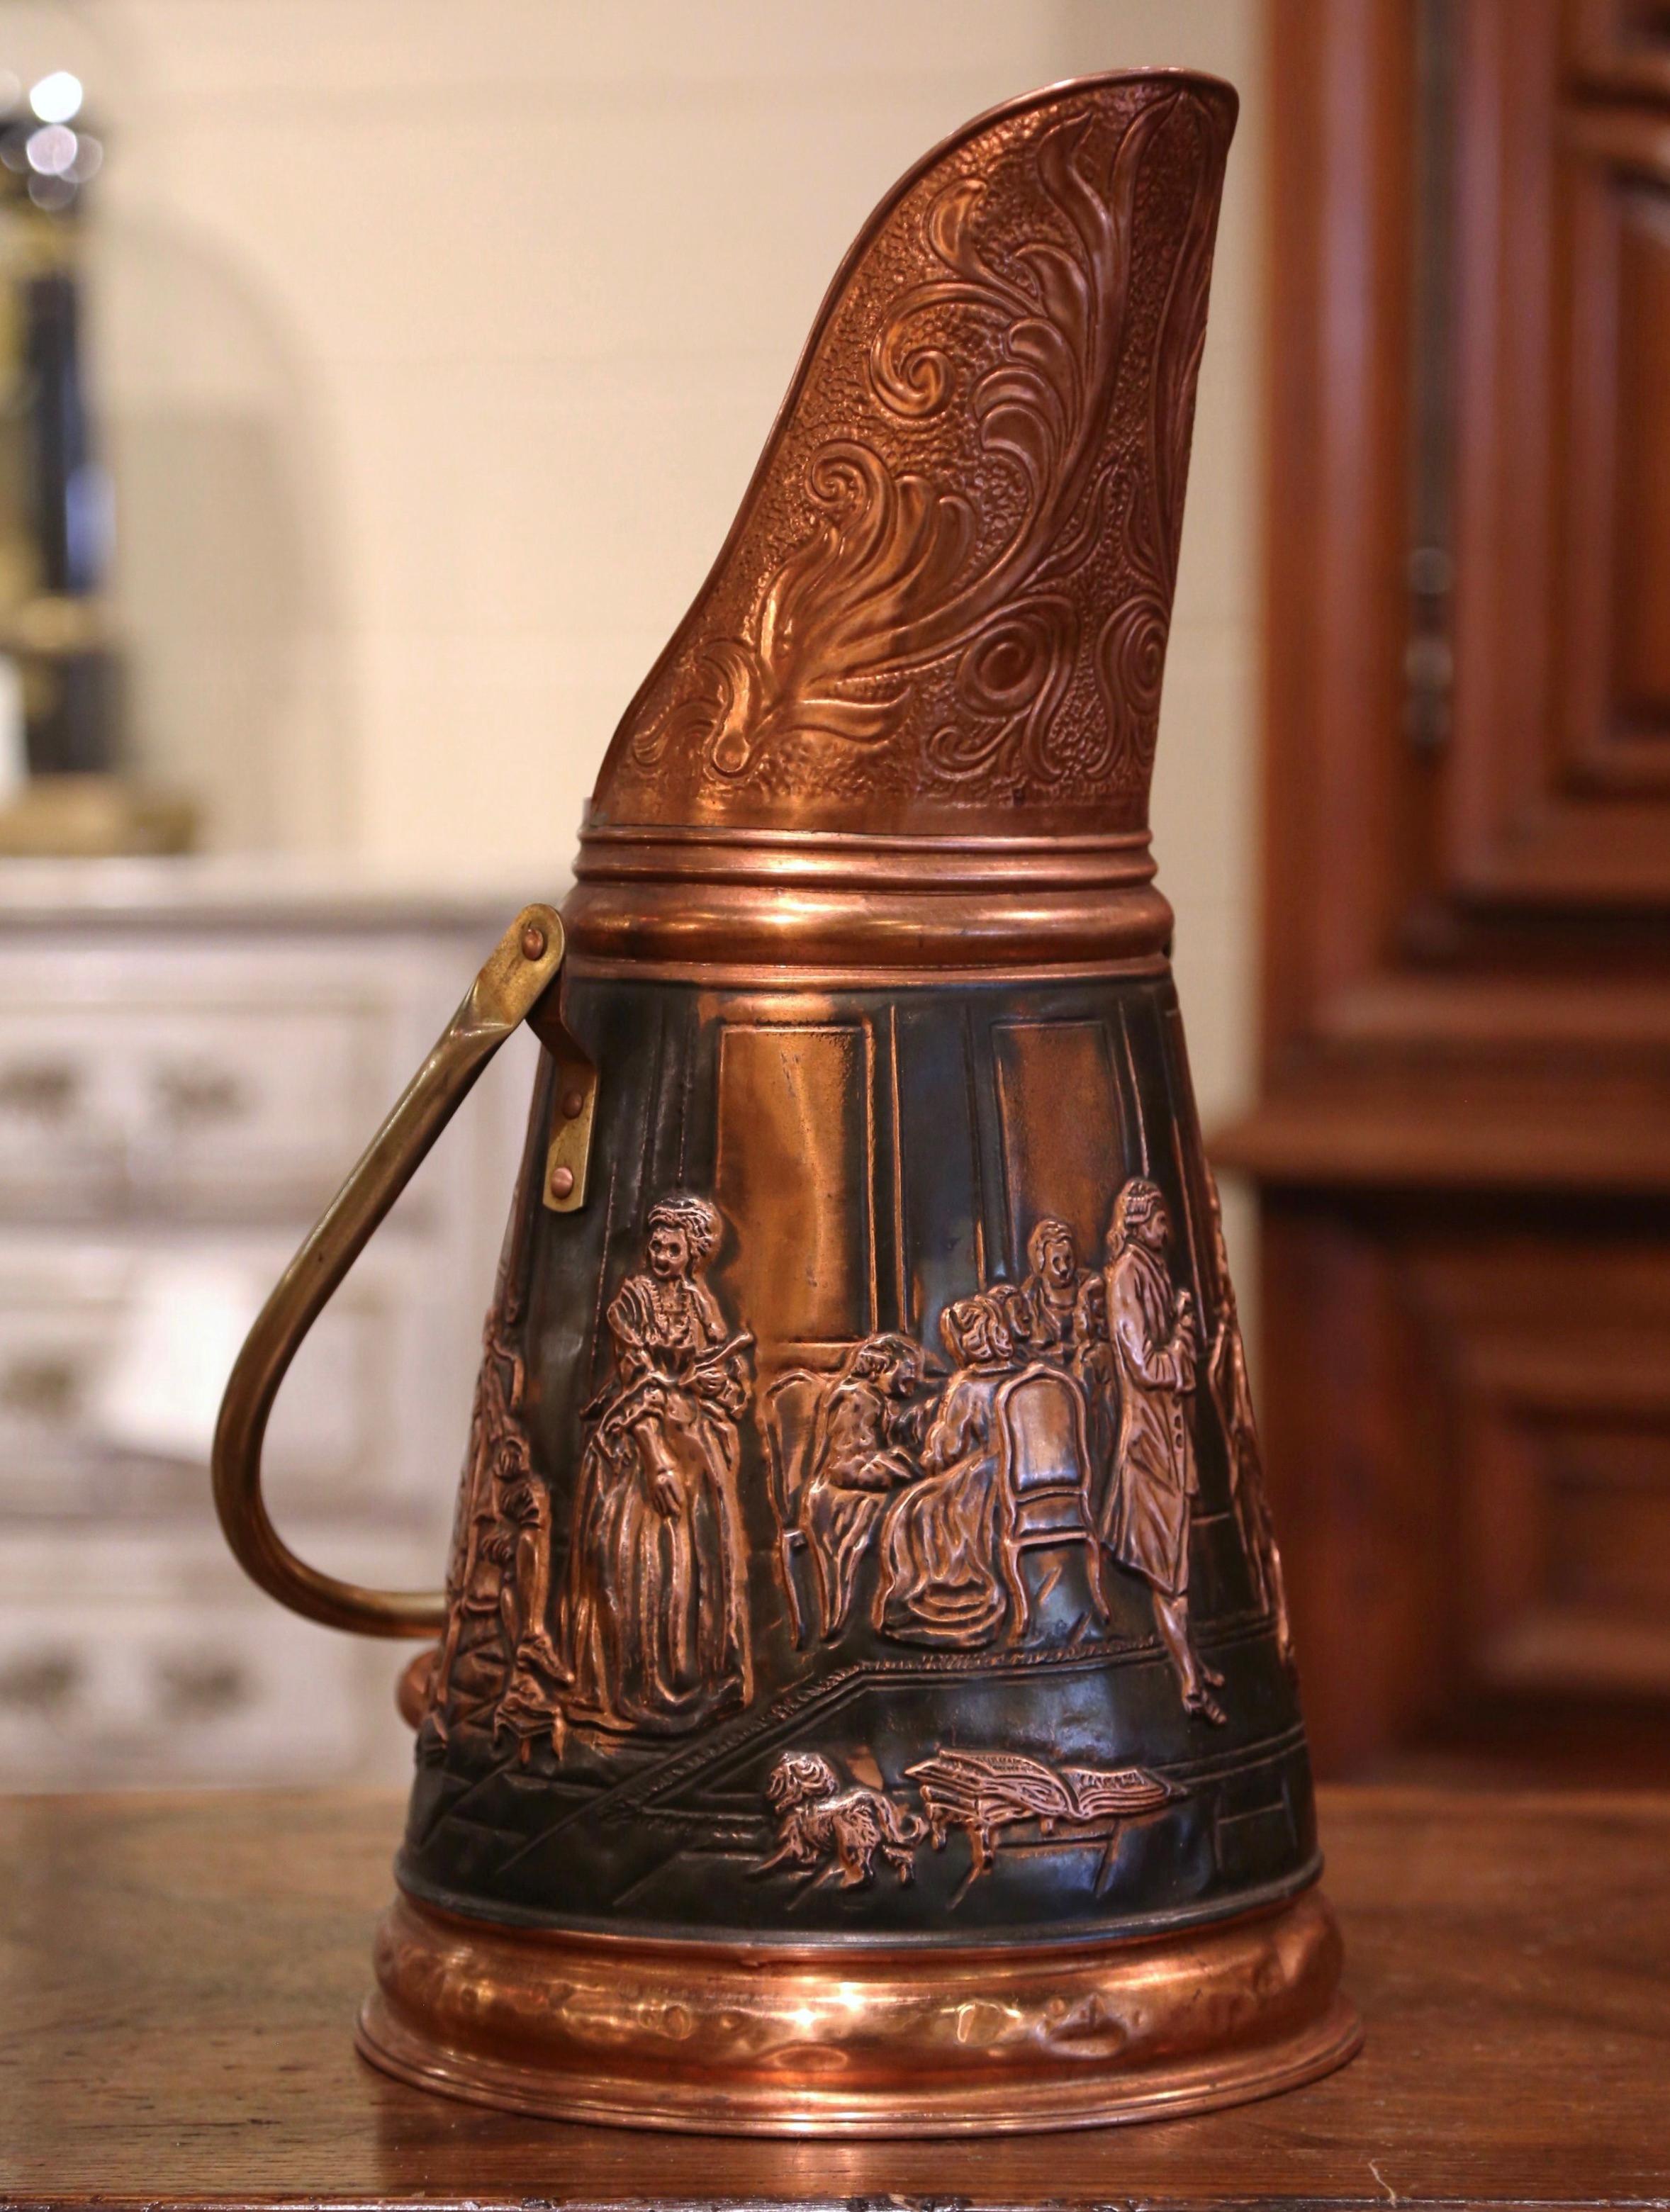 Place this antique hod bucket next to your front door to catch umbrellas and canes. Crafted in France circa 1950 and made of repousse copper with decorative indoor pastoral scene, the bucket features a wide pouring mouth over a round and tapered